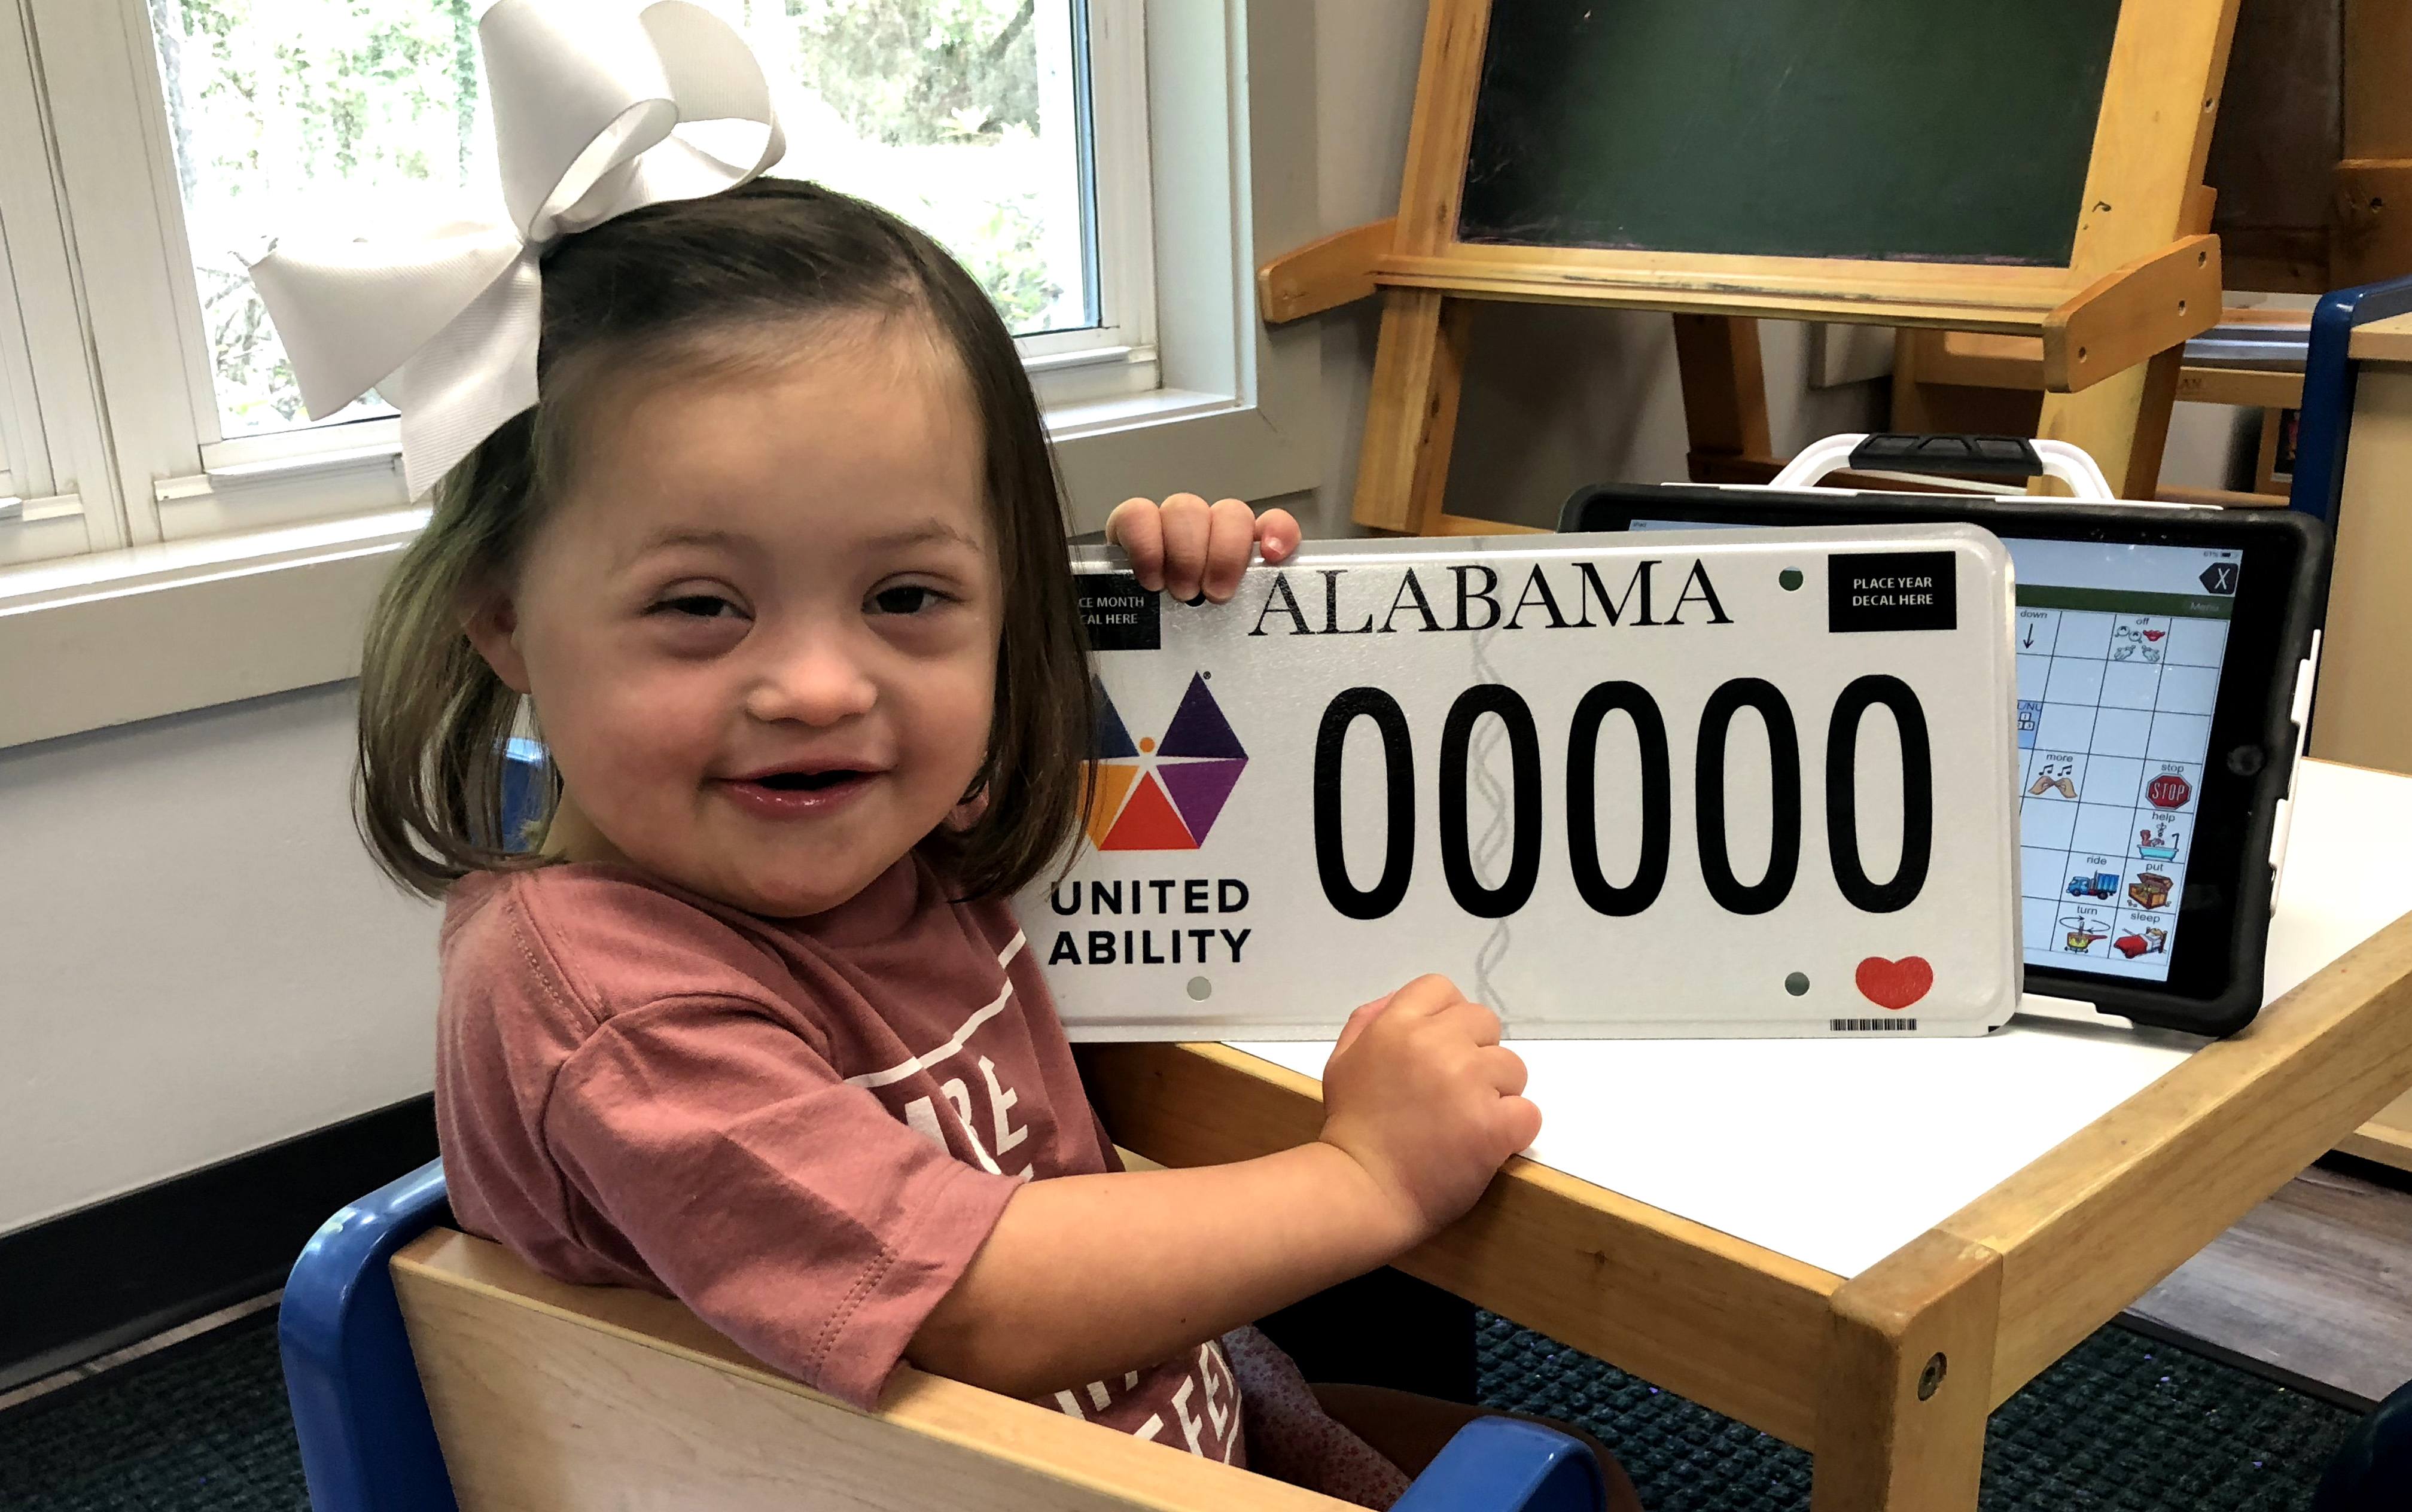 young girl holding united ability car tag